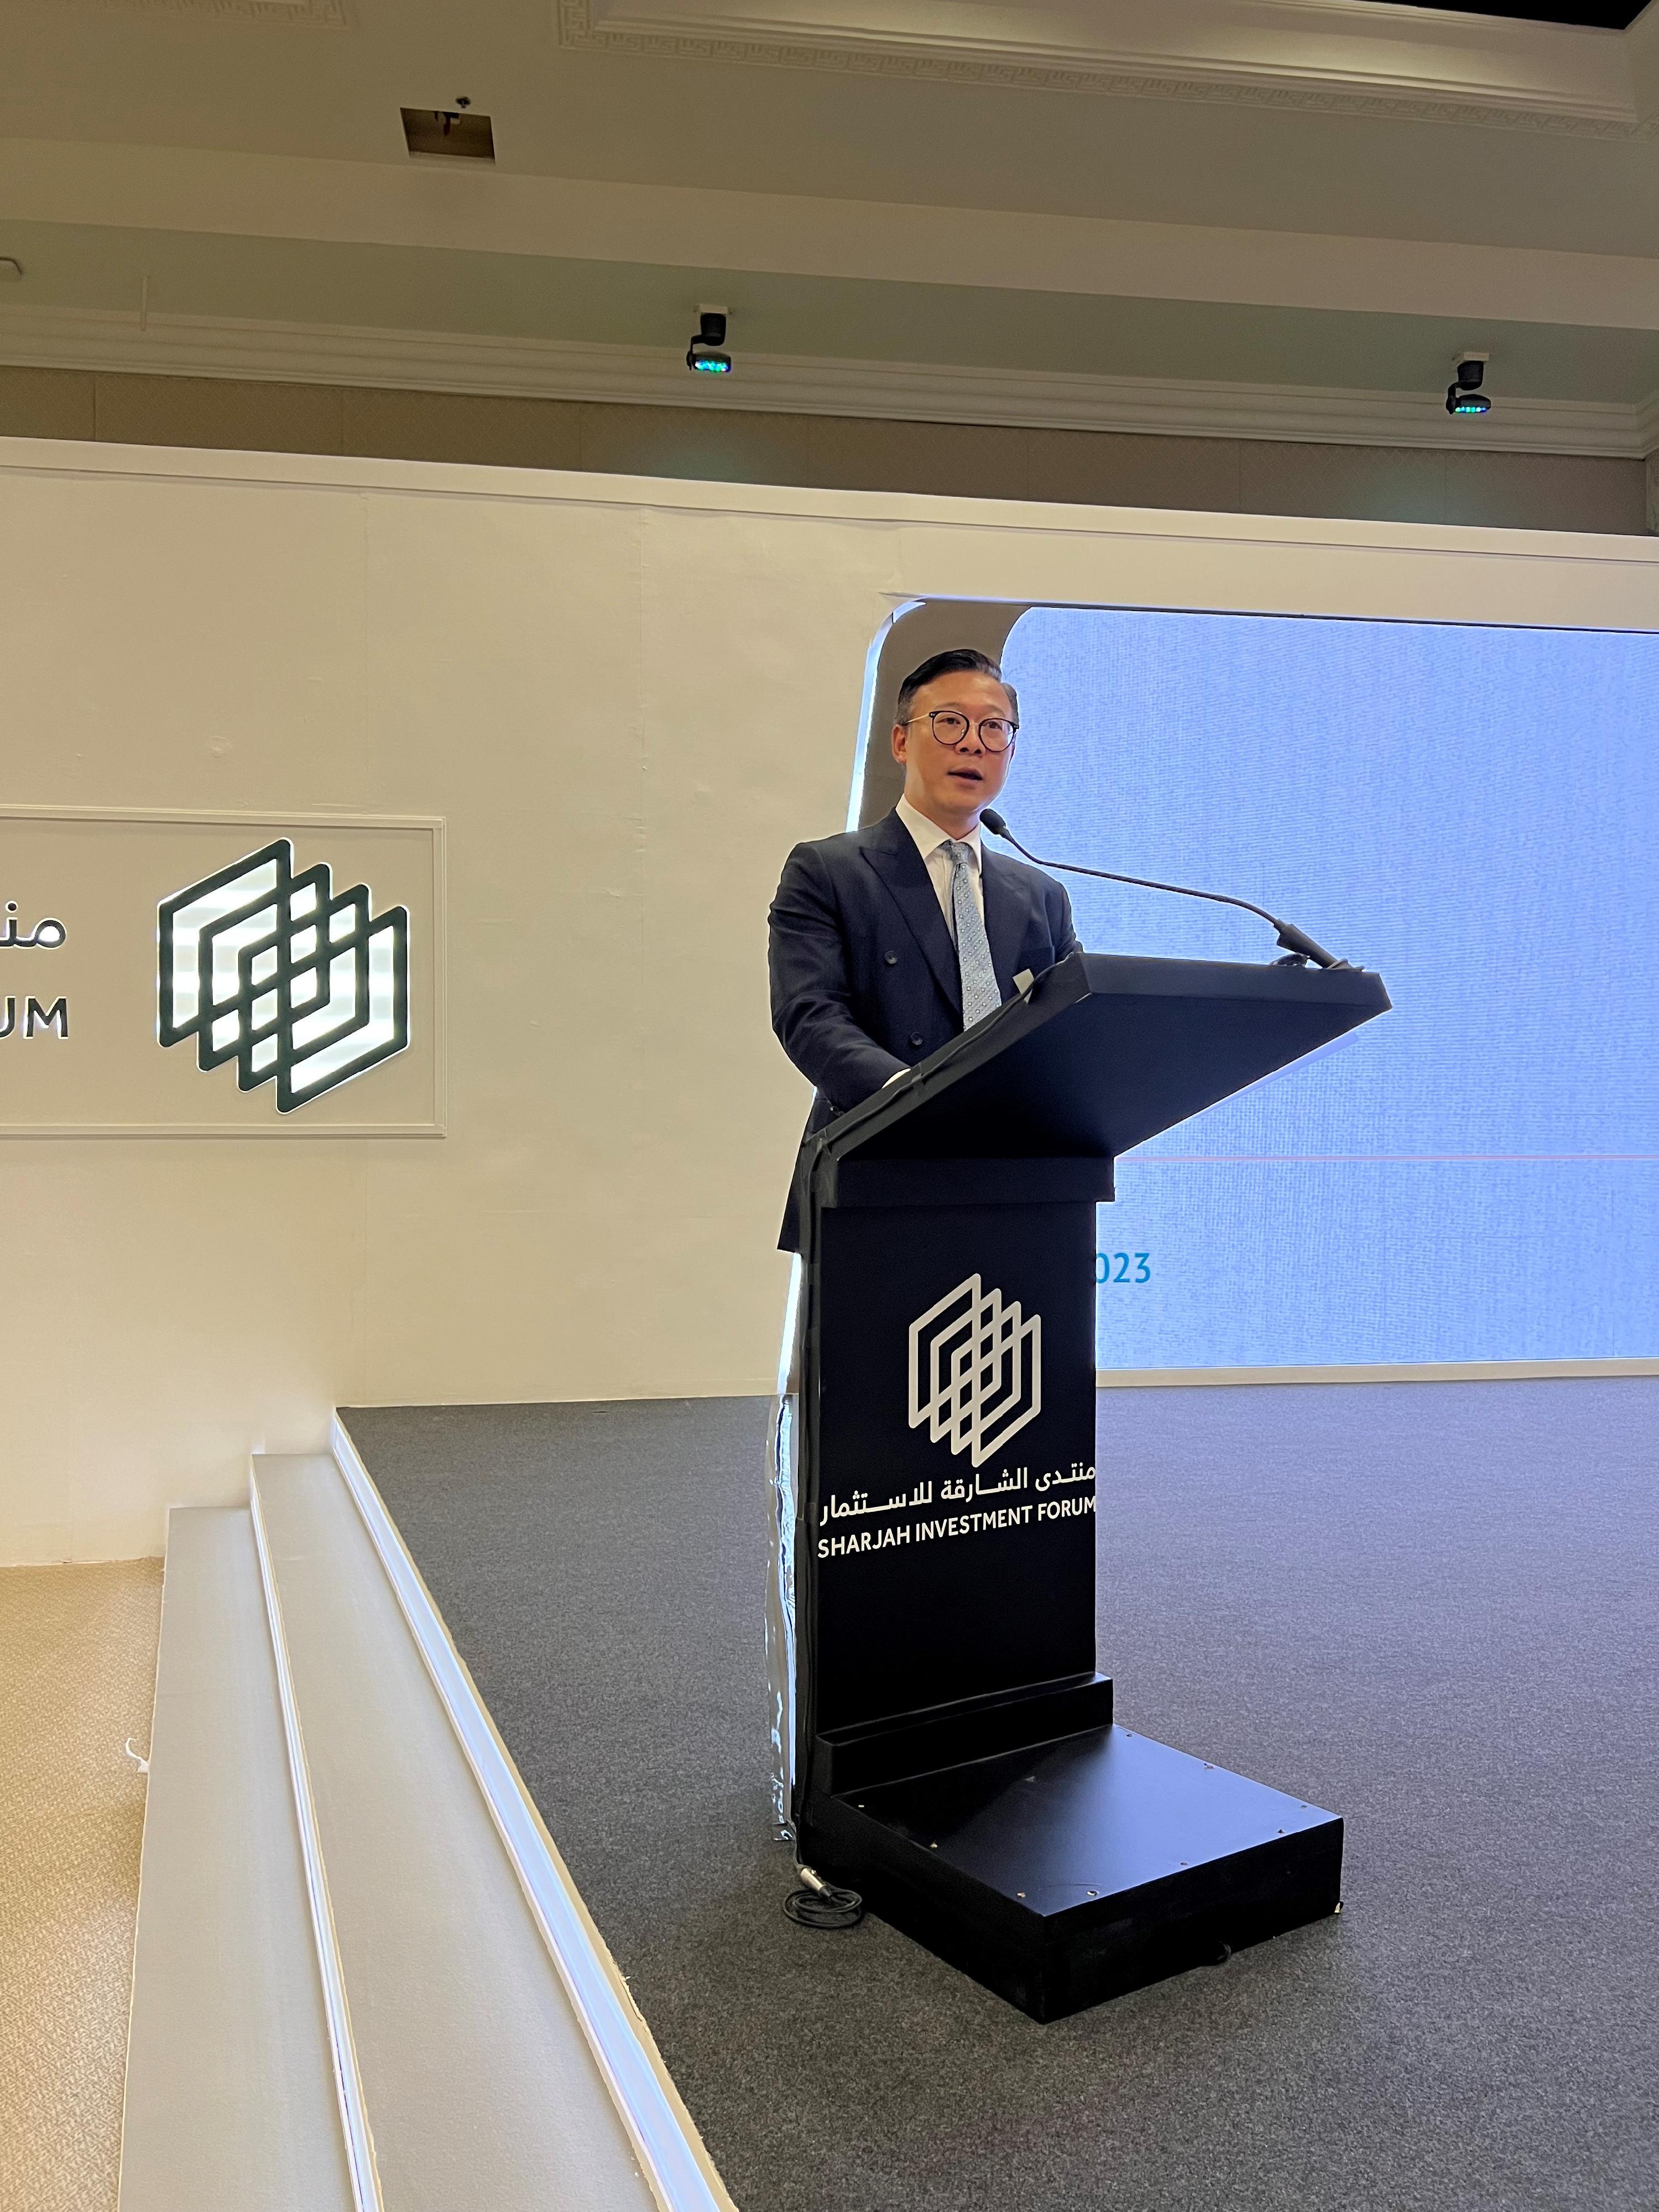 The Deputy Secretary for Justice, Mr Cheung Kwok-kwan, attended the Sharjah Investment Forum in the United Arab Emirates today (February 9). Photo shows Mr Cheung speaking at the forum.